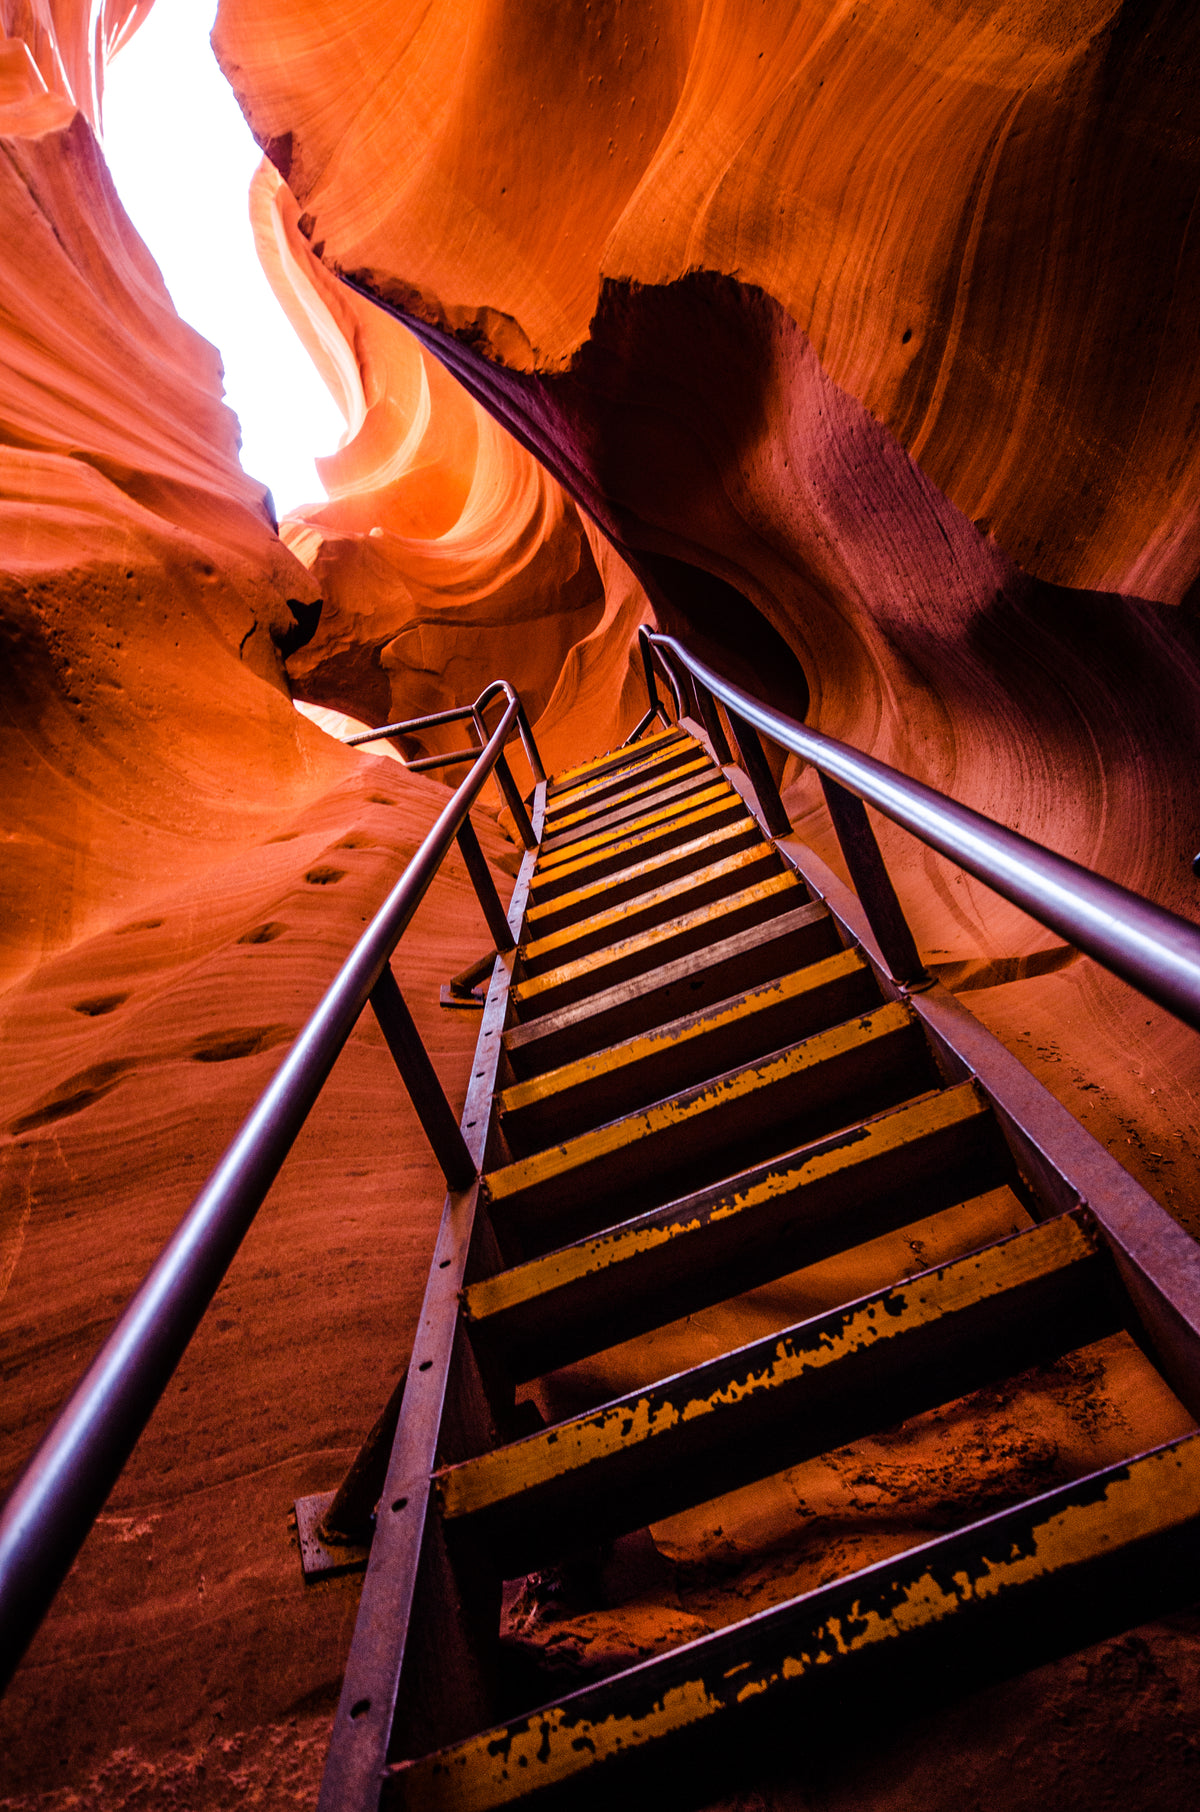 a ladder scales the steep sides of a red sandstone cave